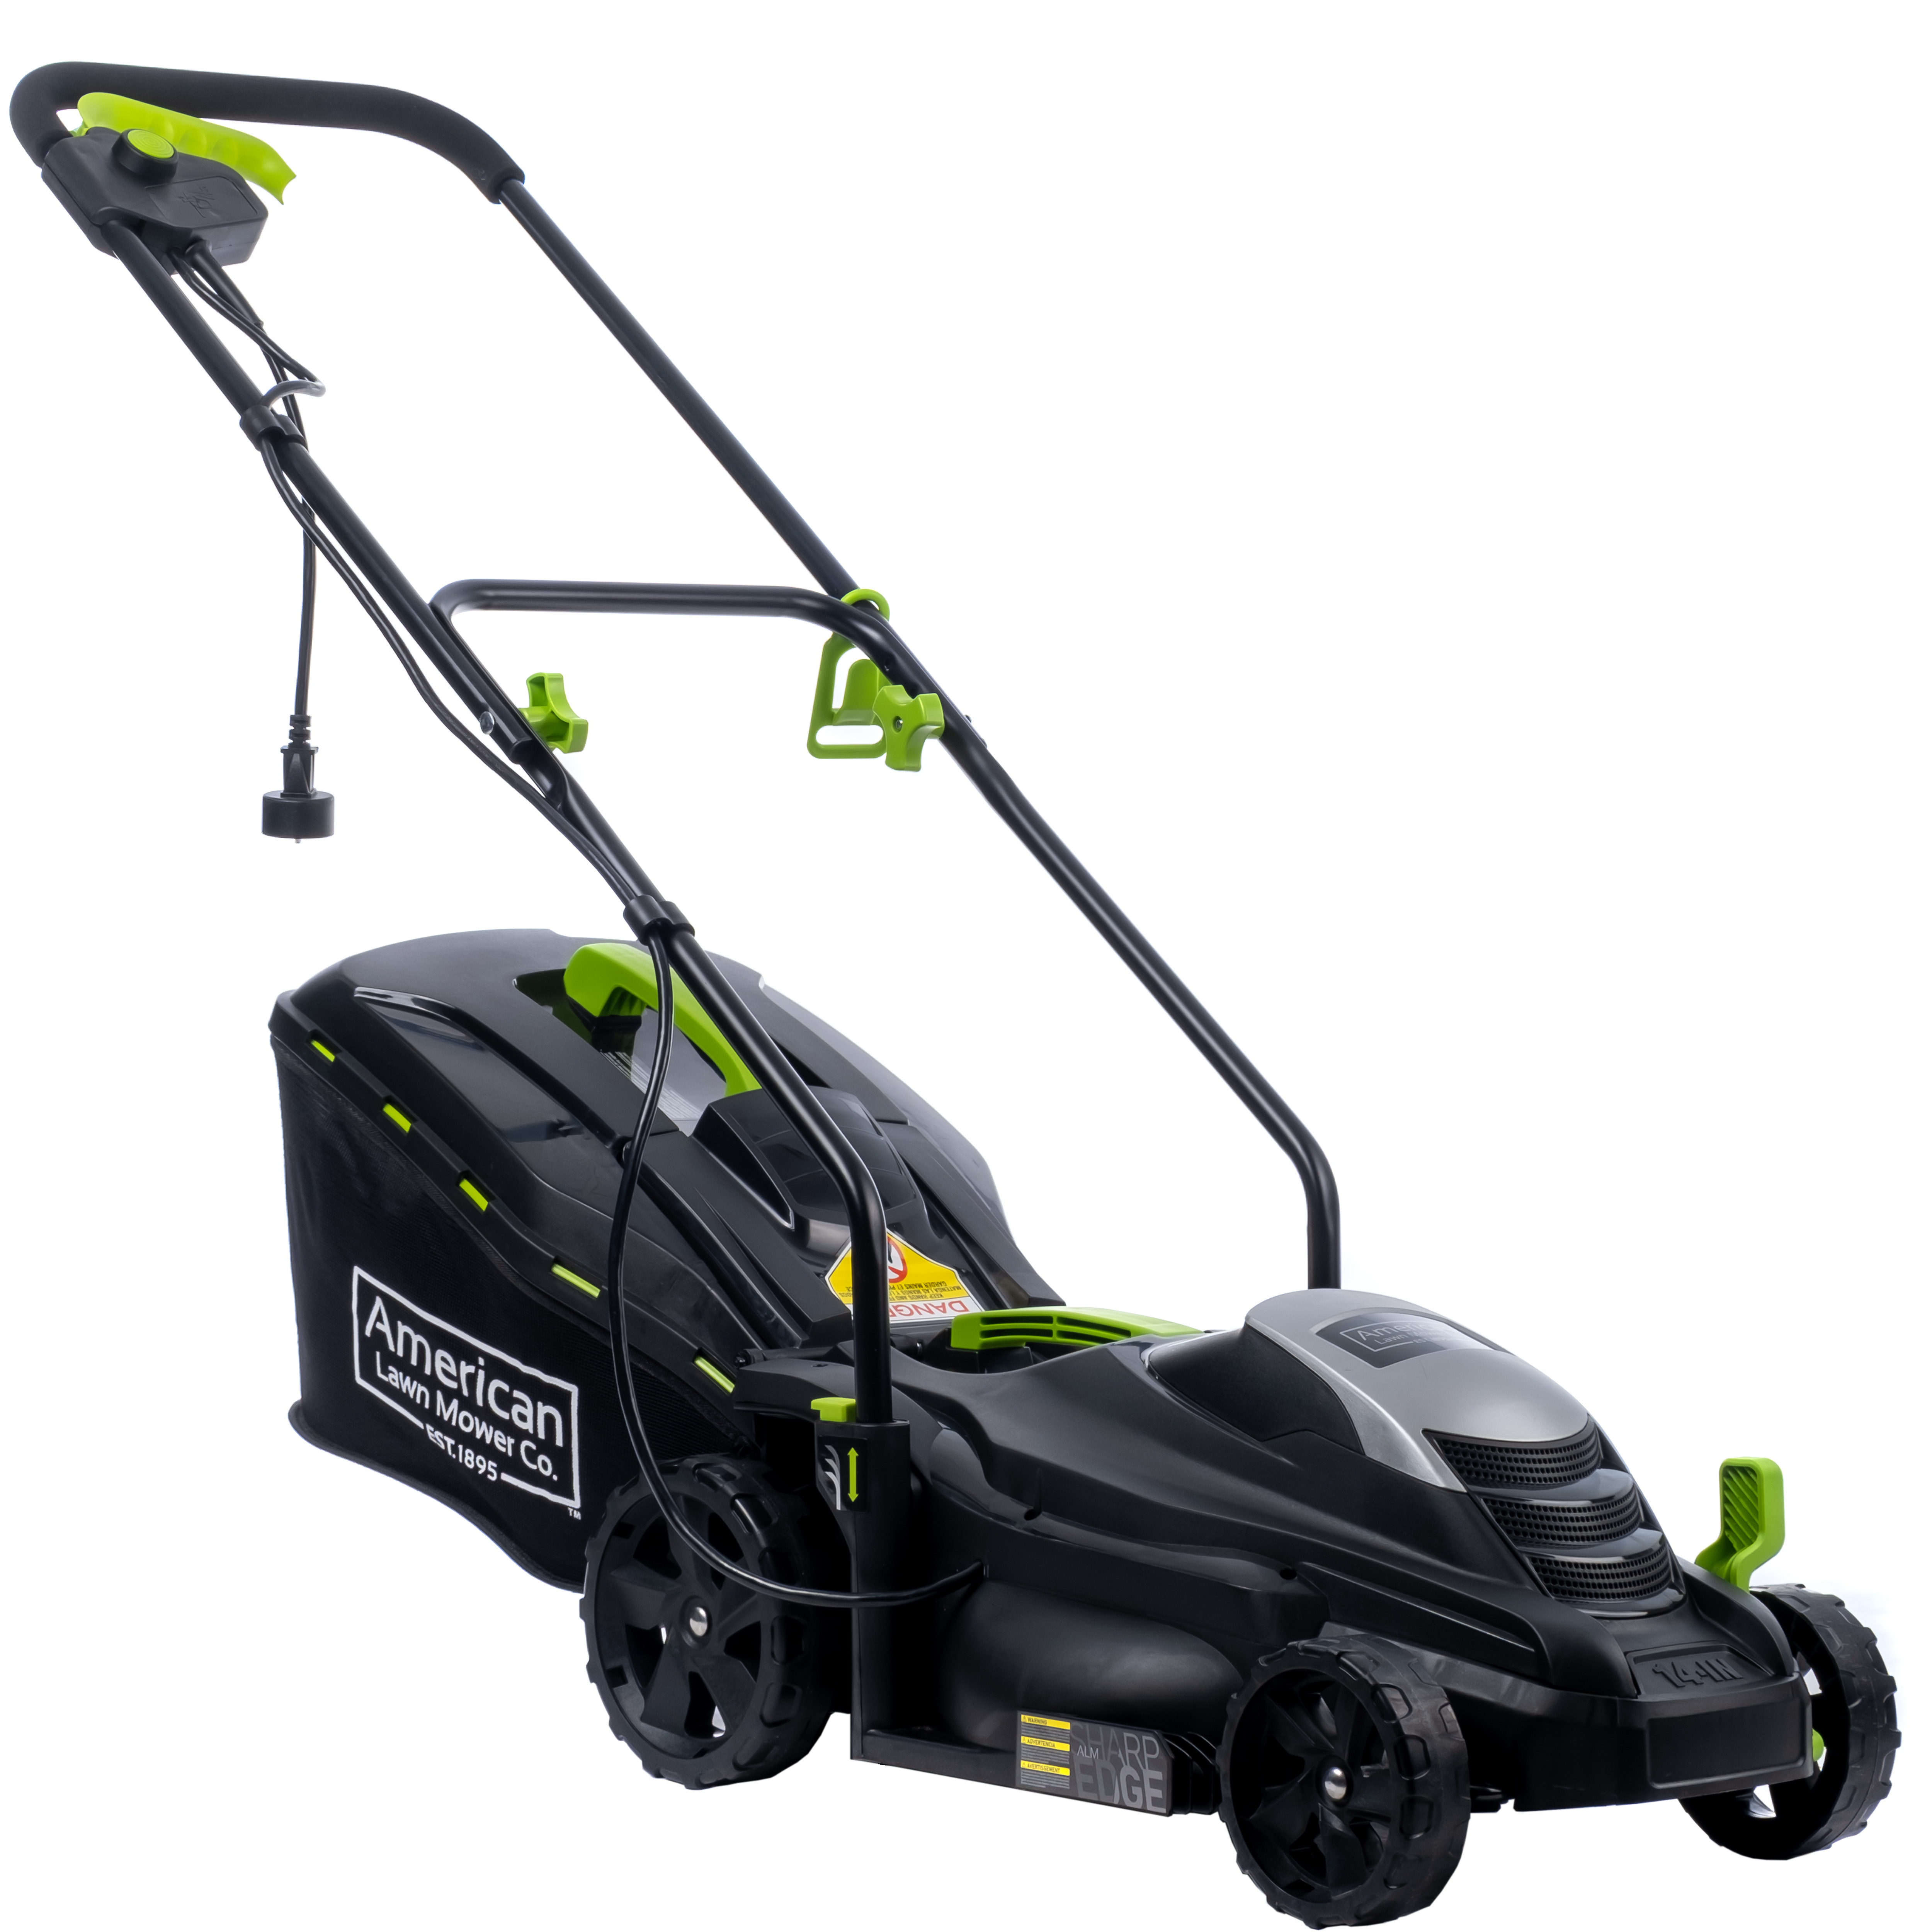 American Lawn Mower 50514 14" Corded Electric Lawn Mower - image 4 of 4